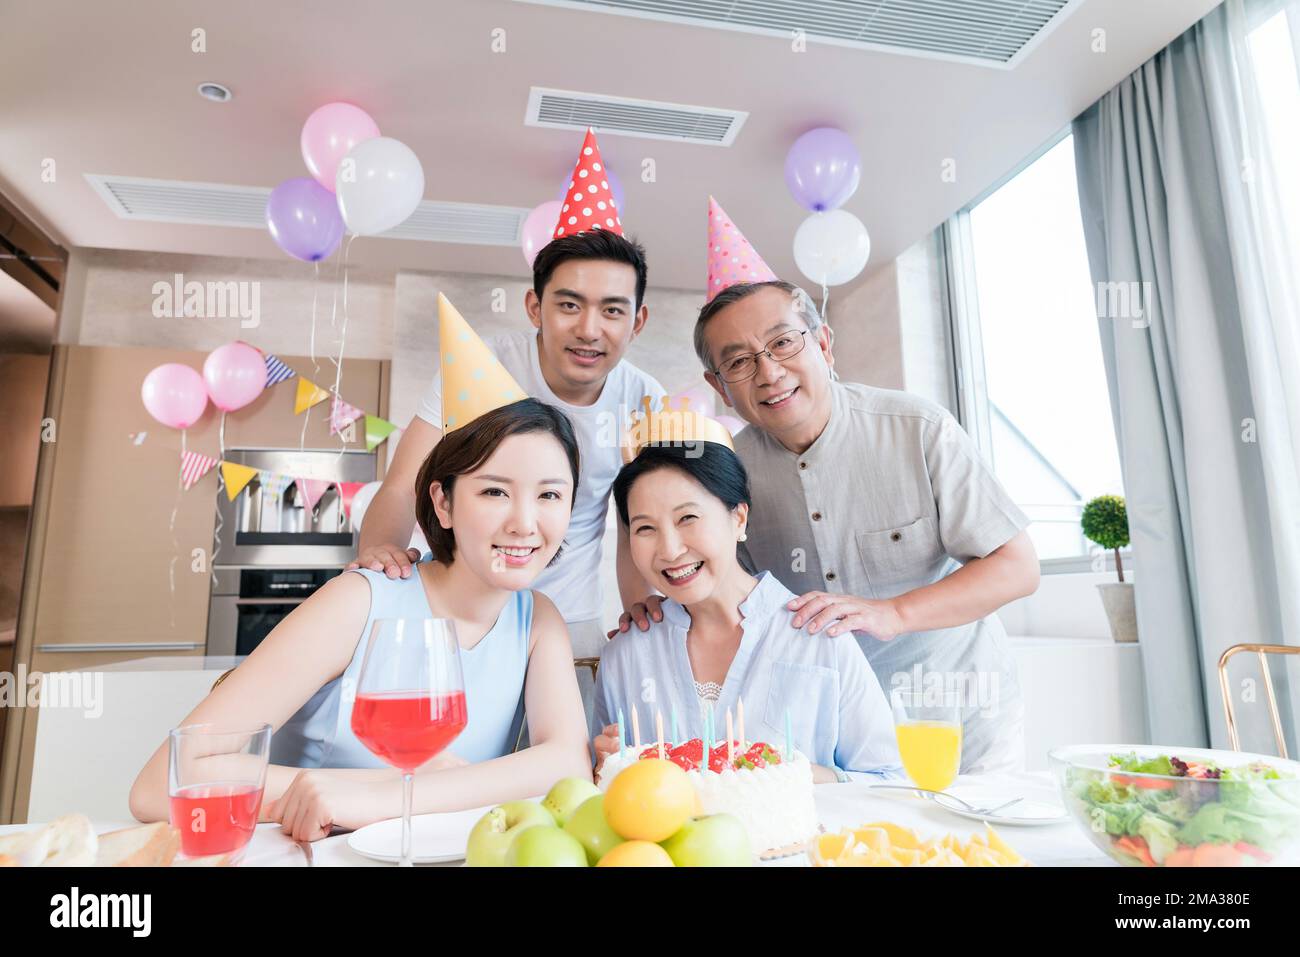 Happy family party to celebrate in the kitchen Stock Photo